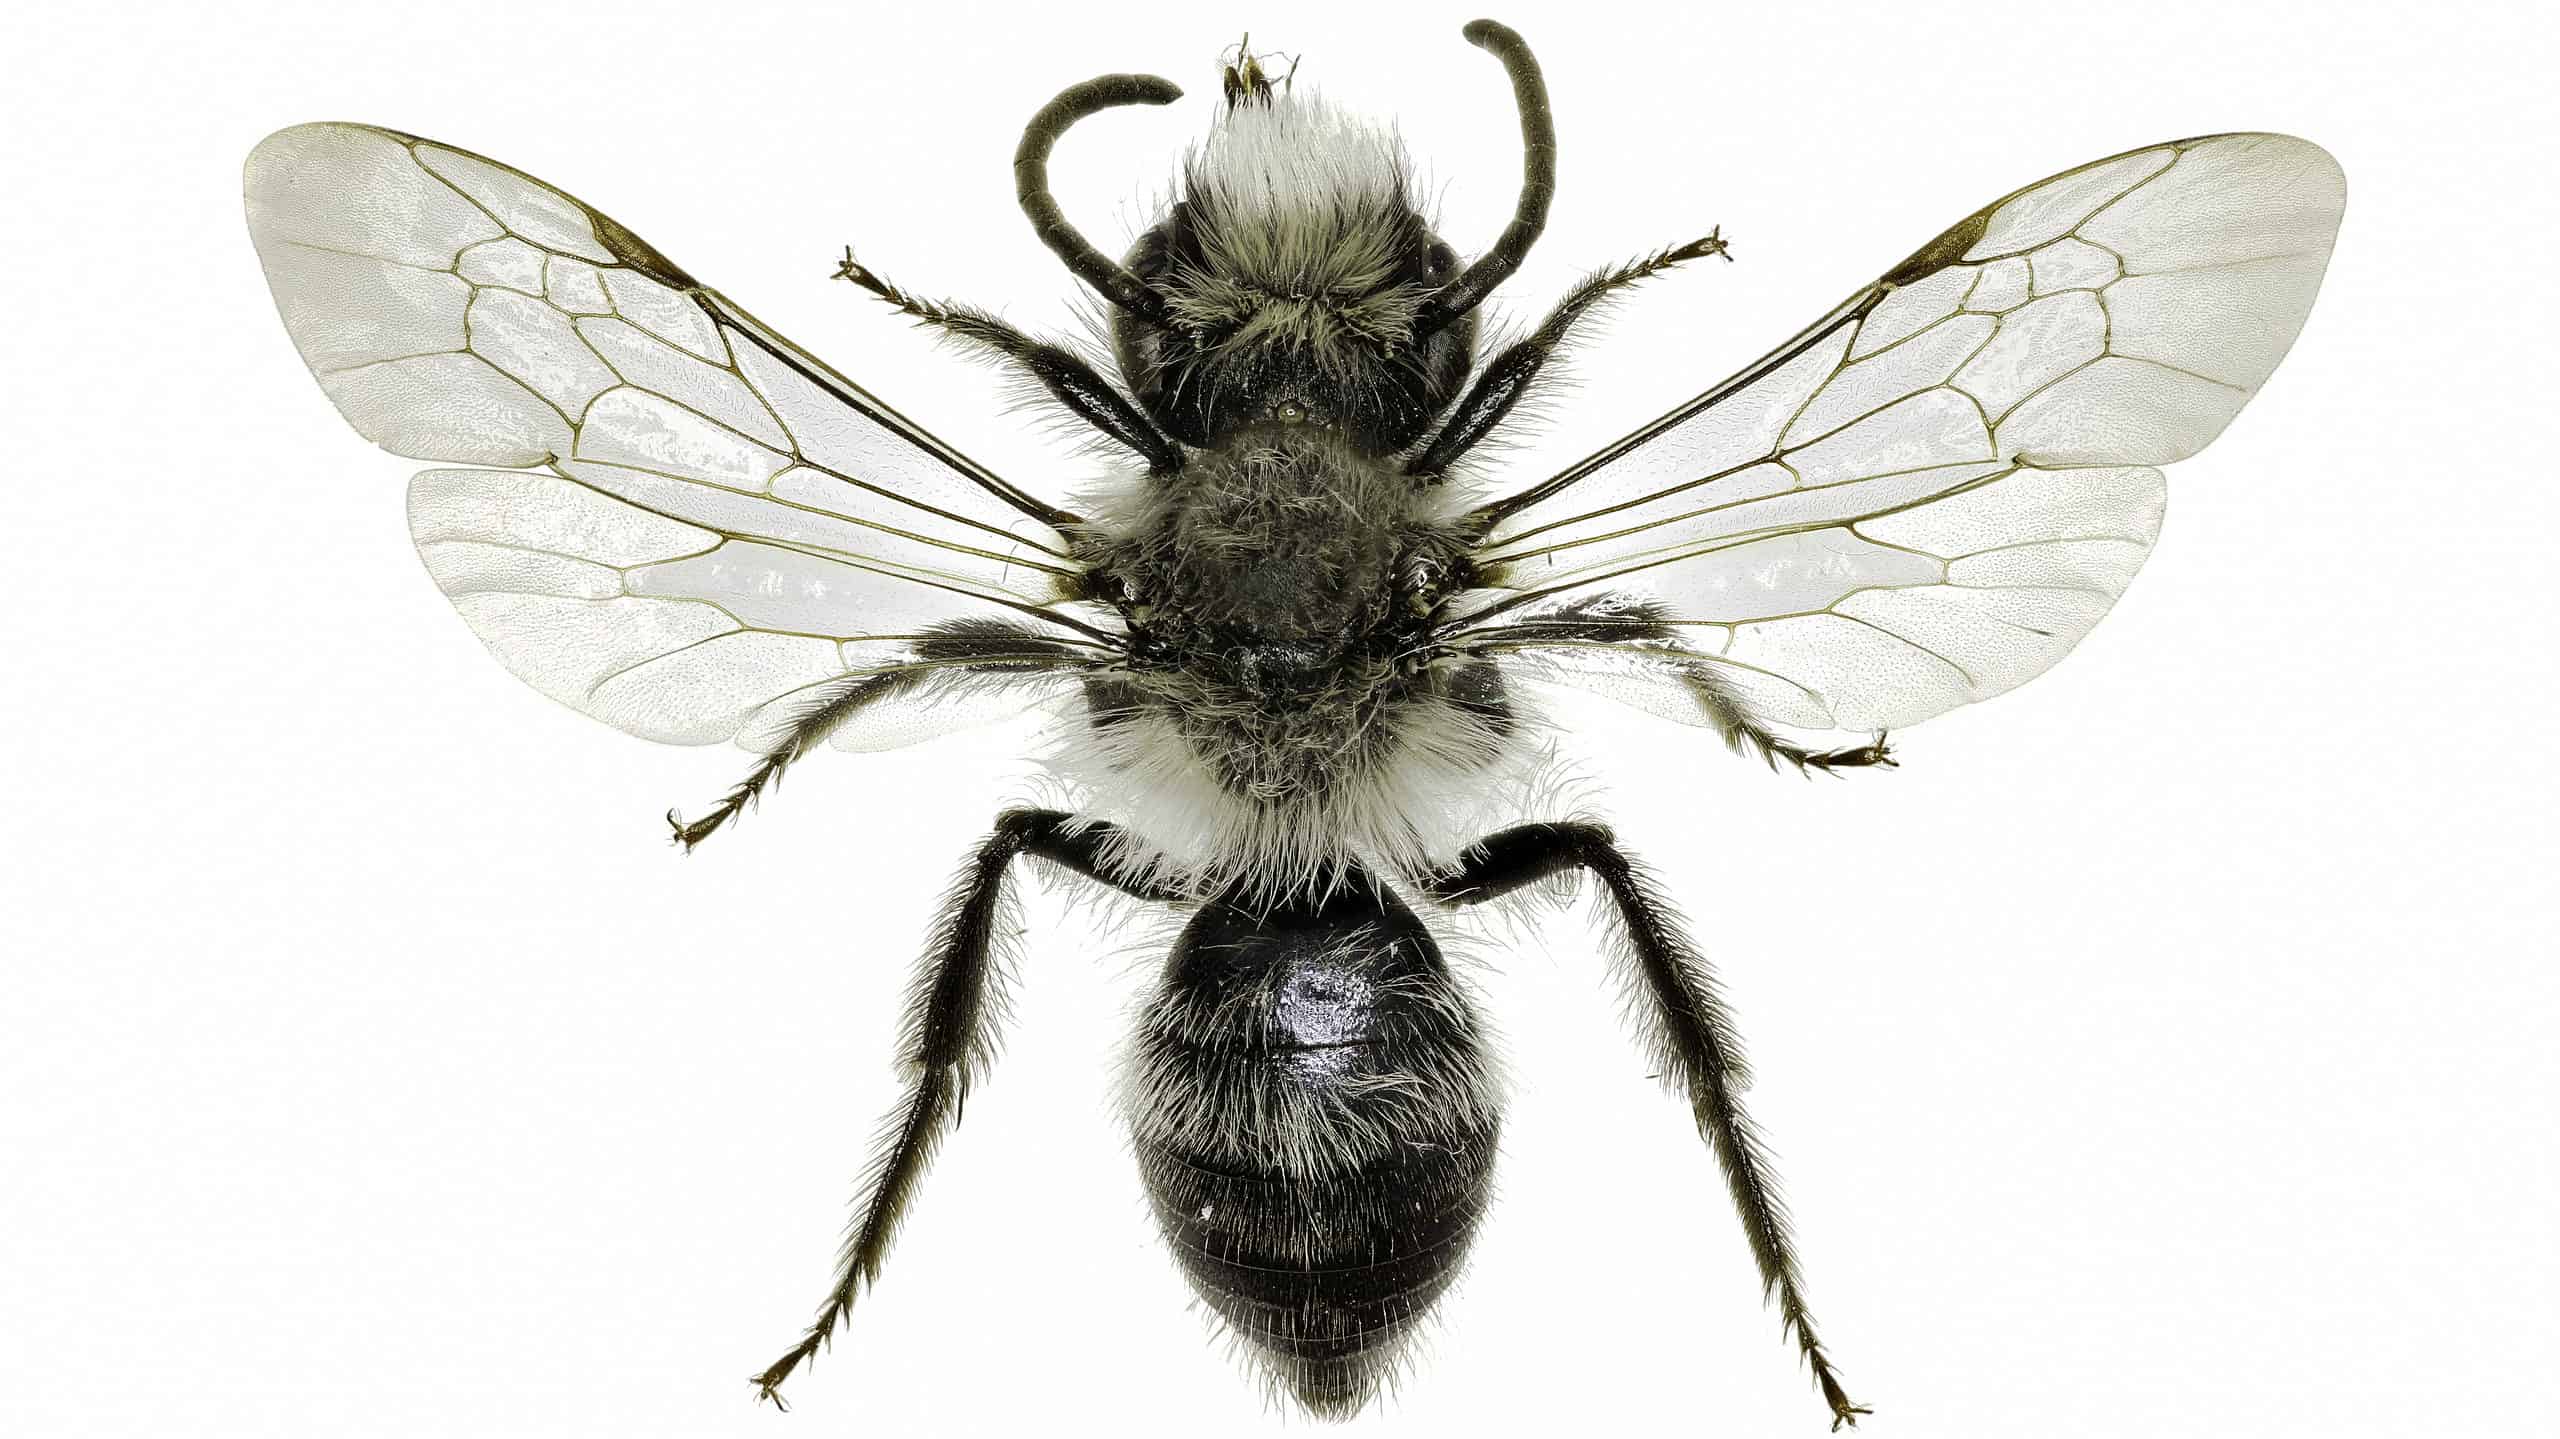 Macro of ashy mining bee against isolate white. The bee is primarily black with white hairs. There is a tuft of white hair on its head and its wings appear to be transparent but with very many veins